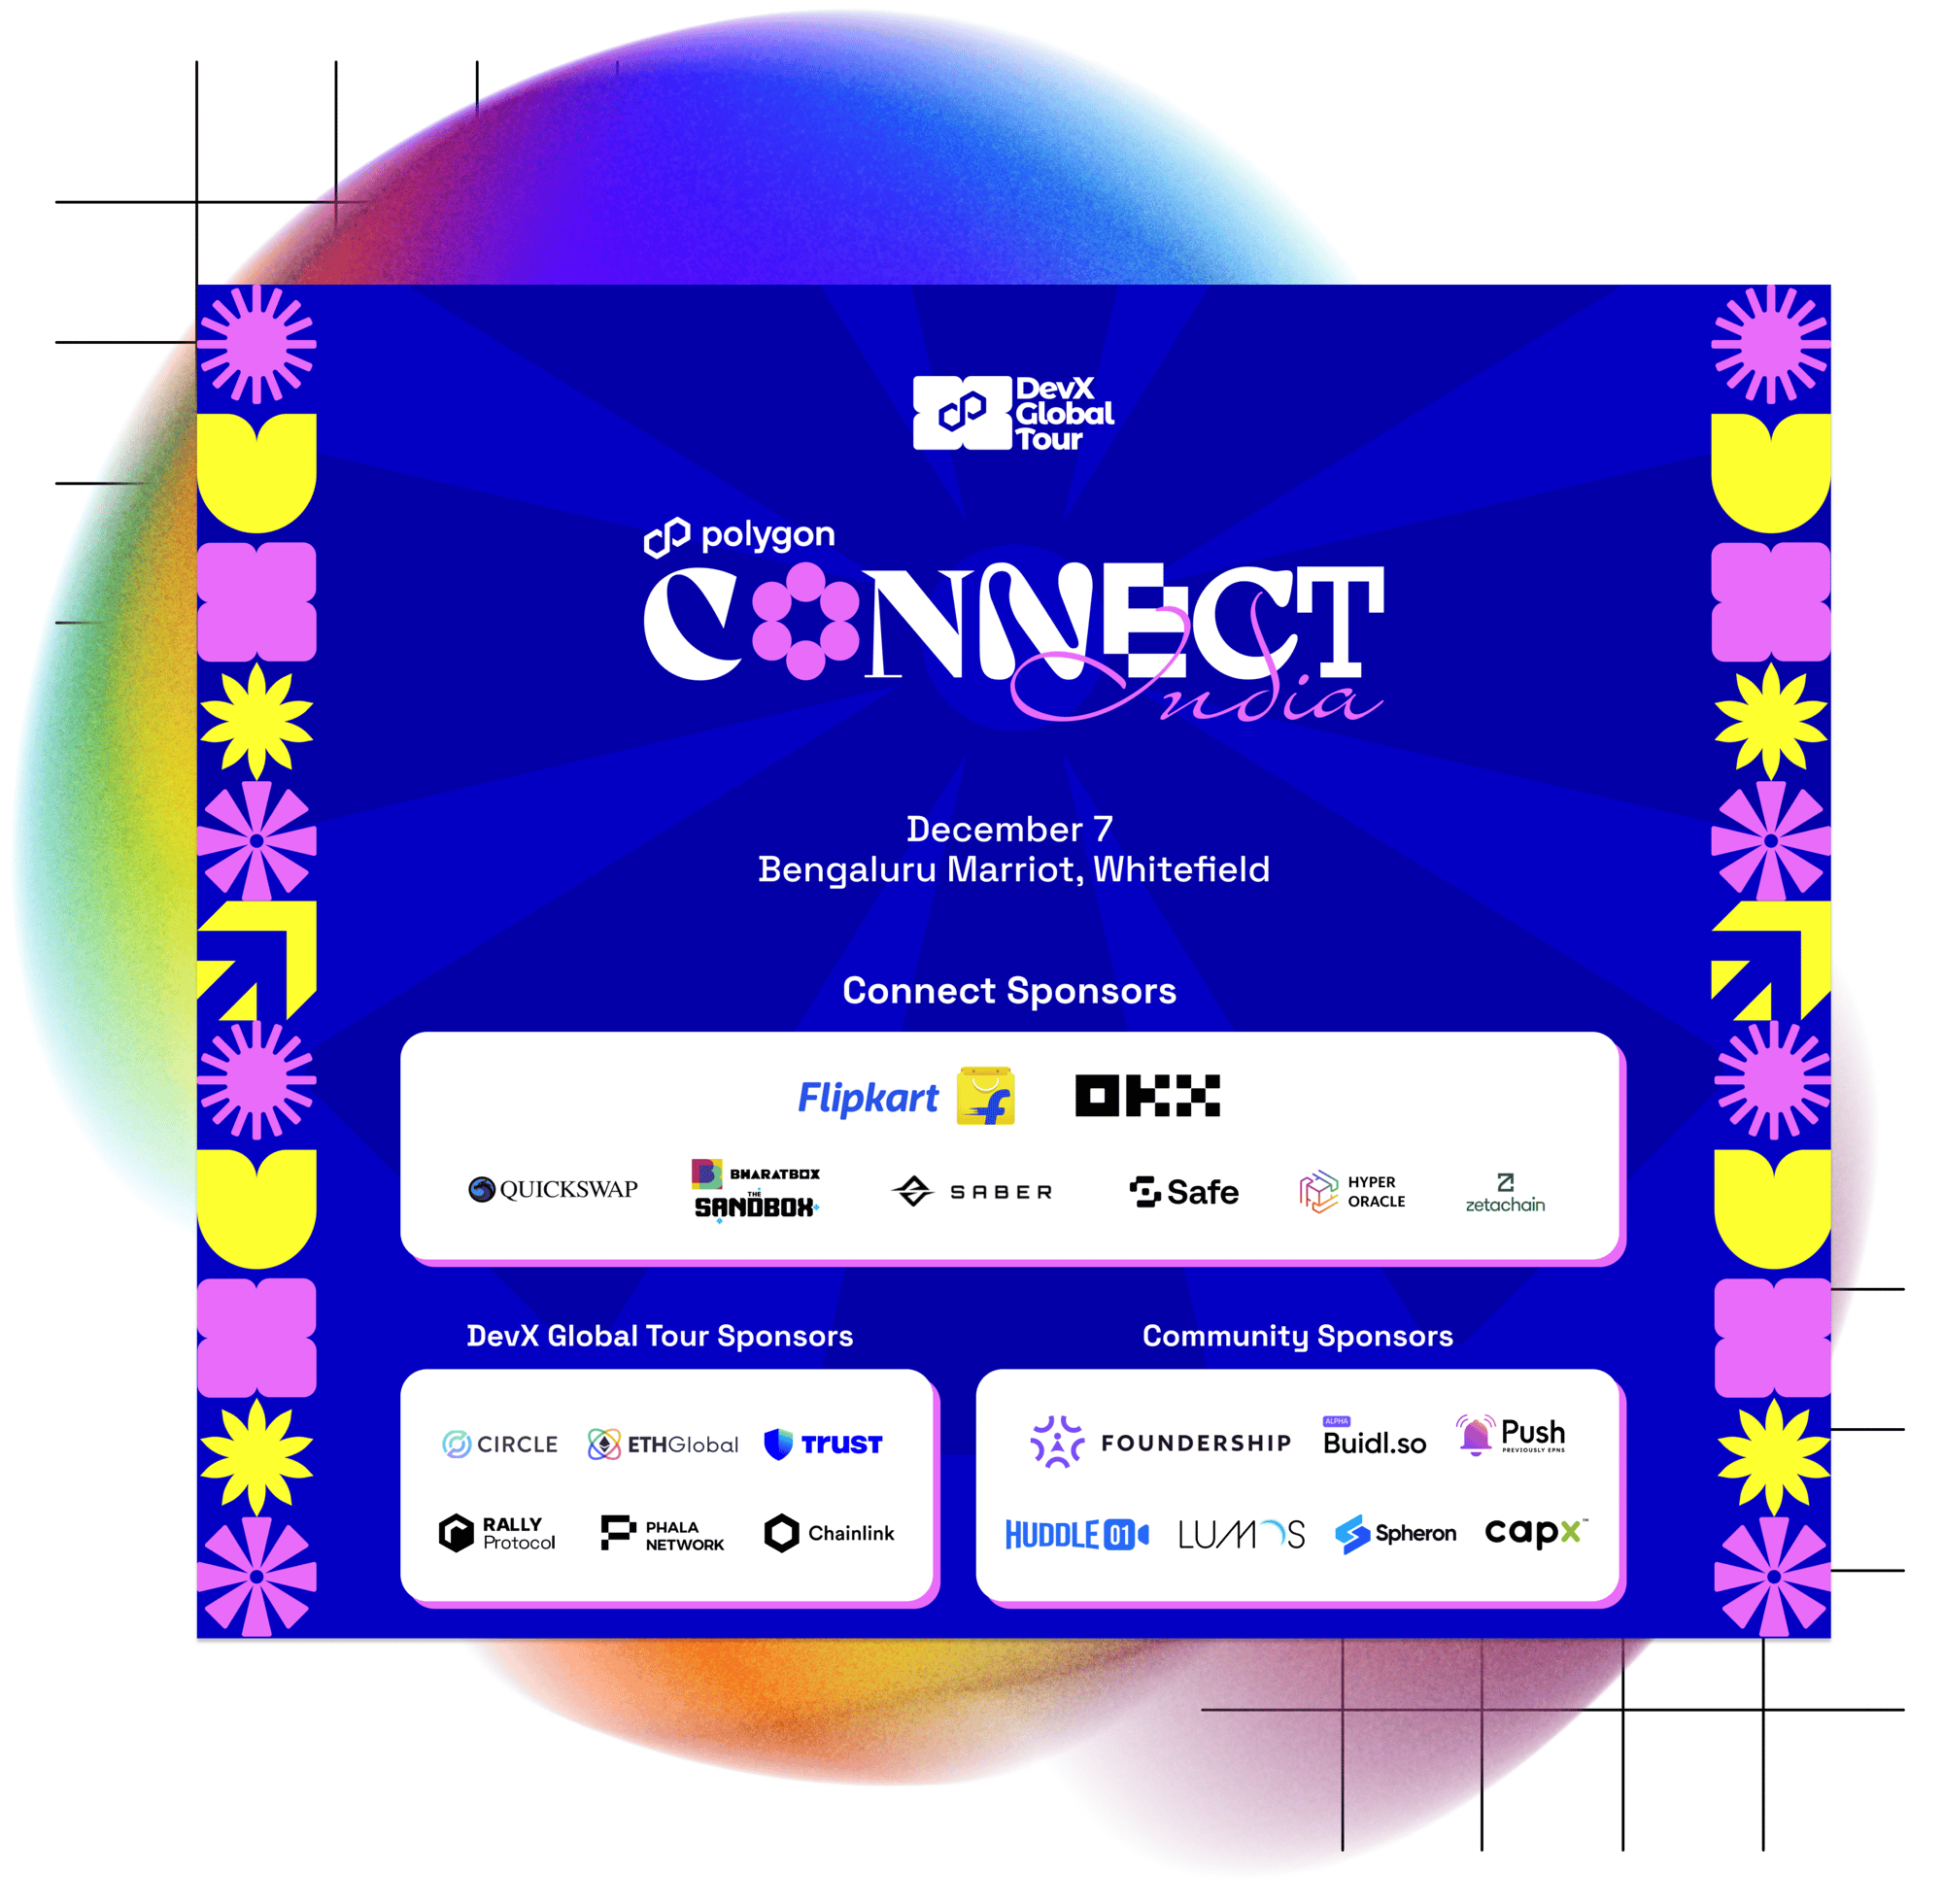 Polygon Connect (1)